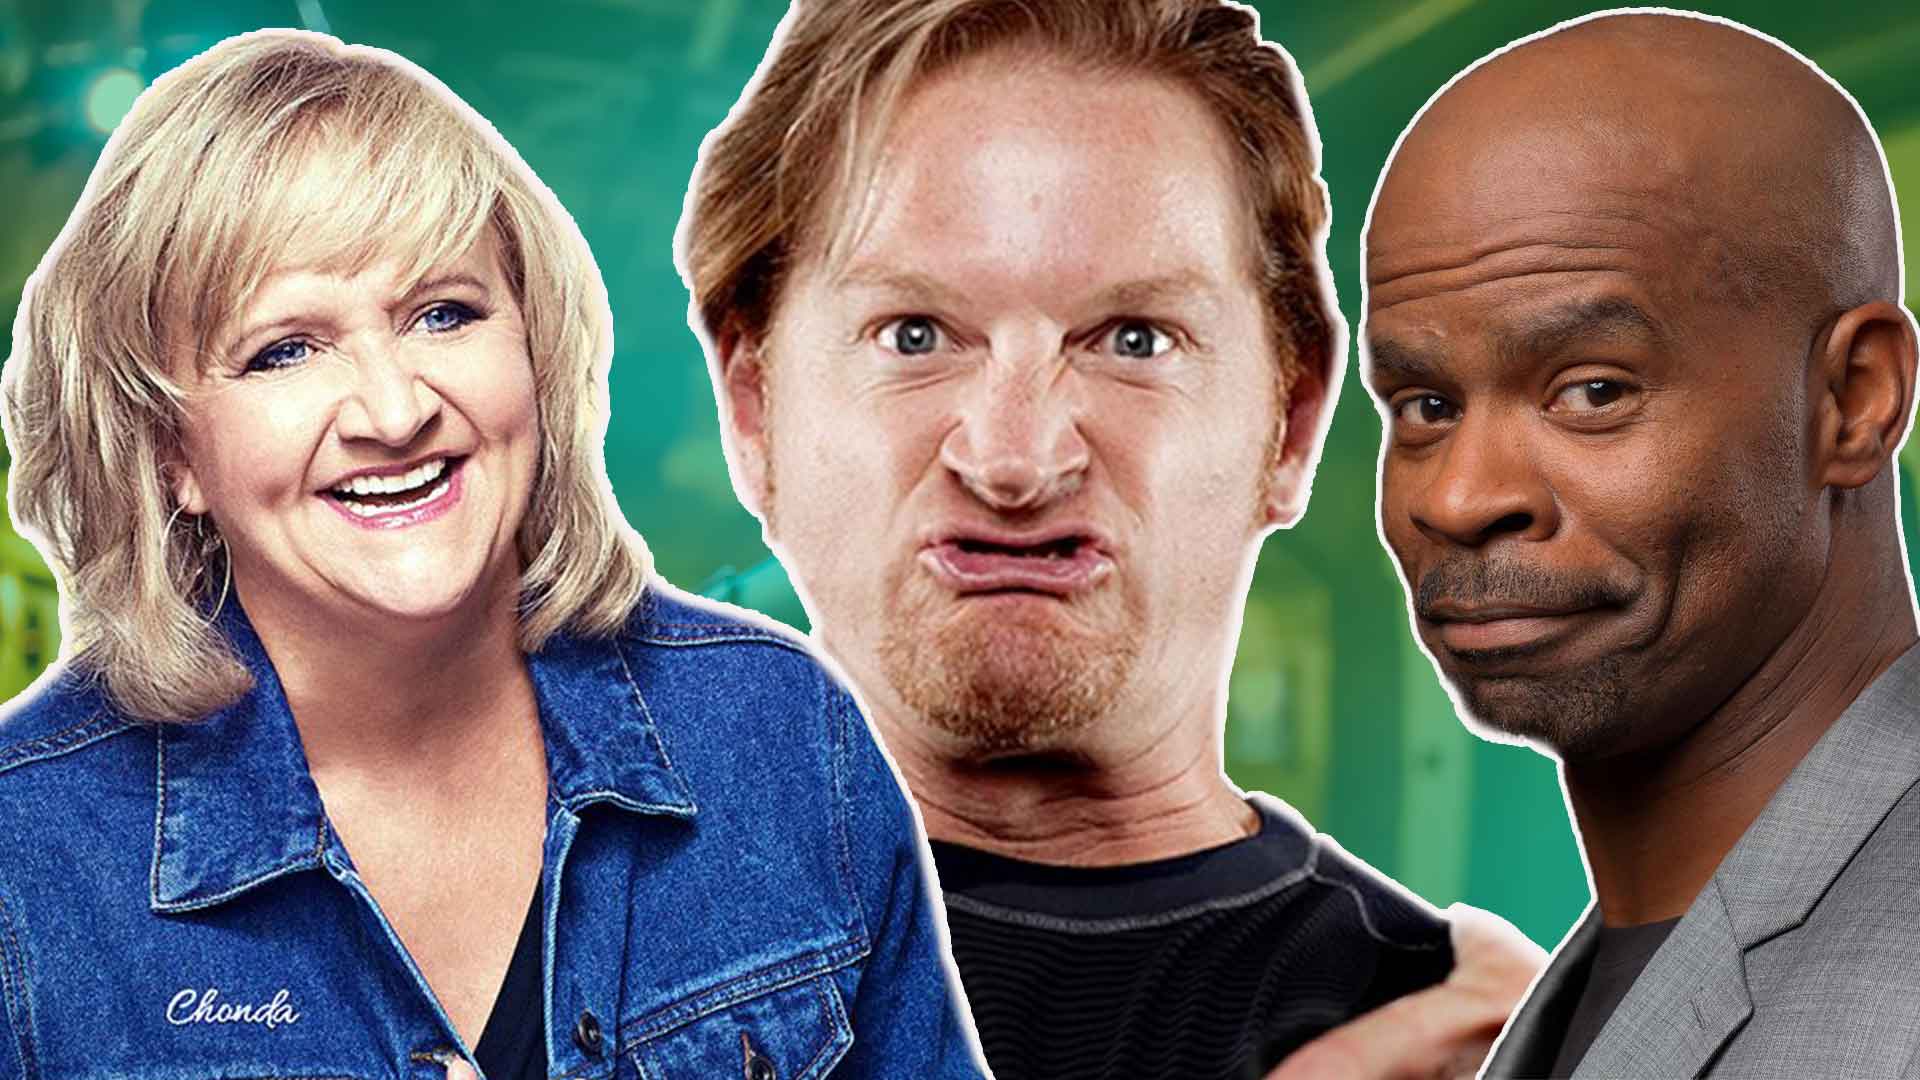 Christian Comedians Chonda Pierce, Tim Hawkins, and Michael Jr. have hilarious stand up